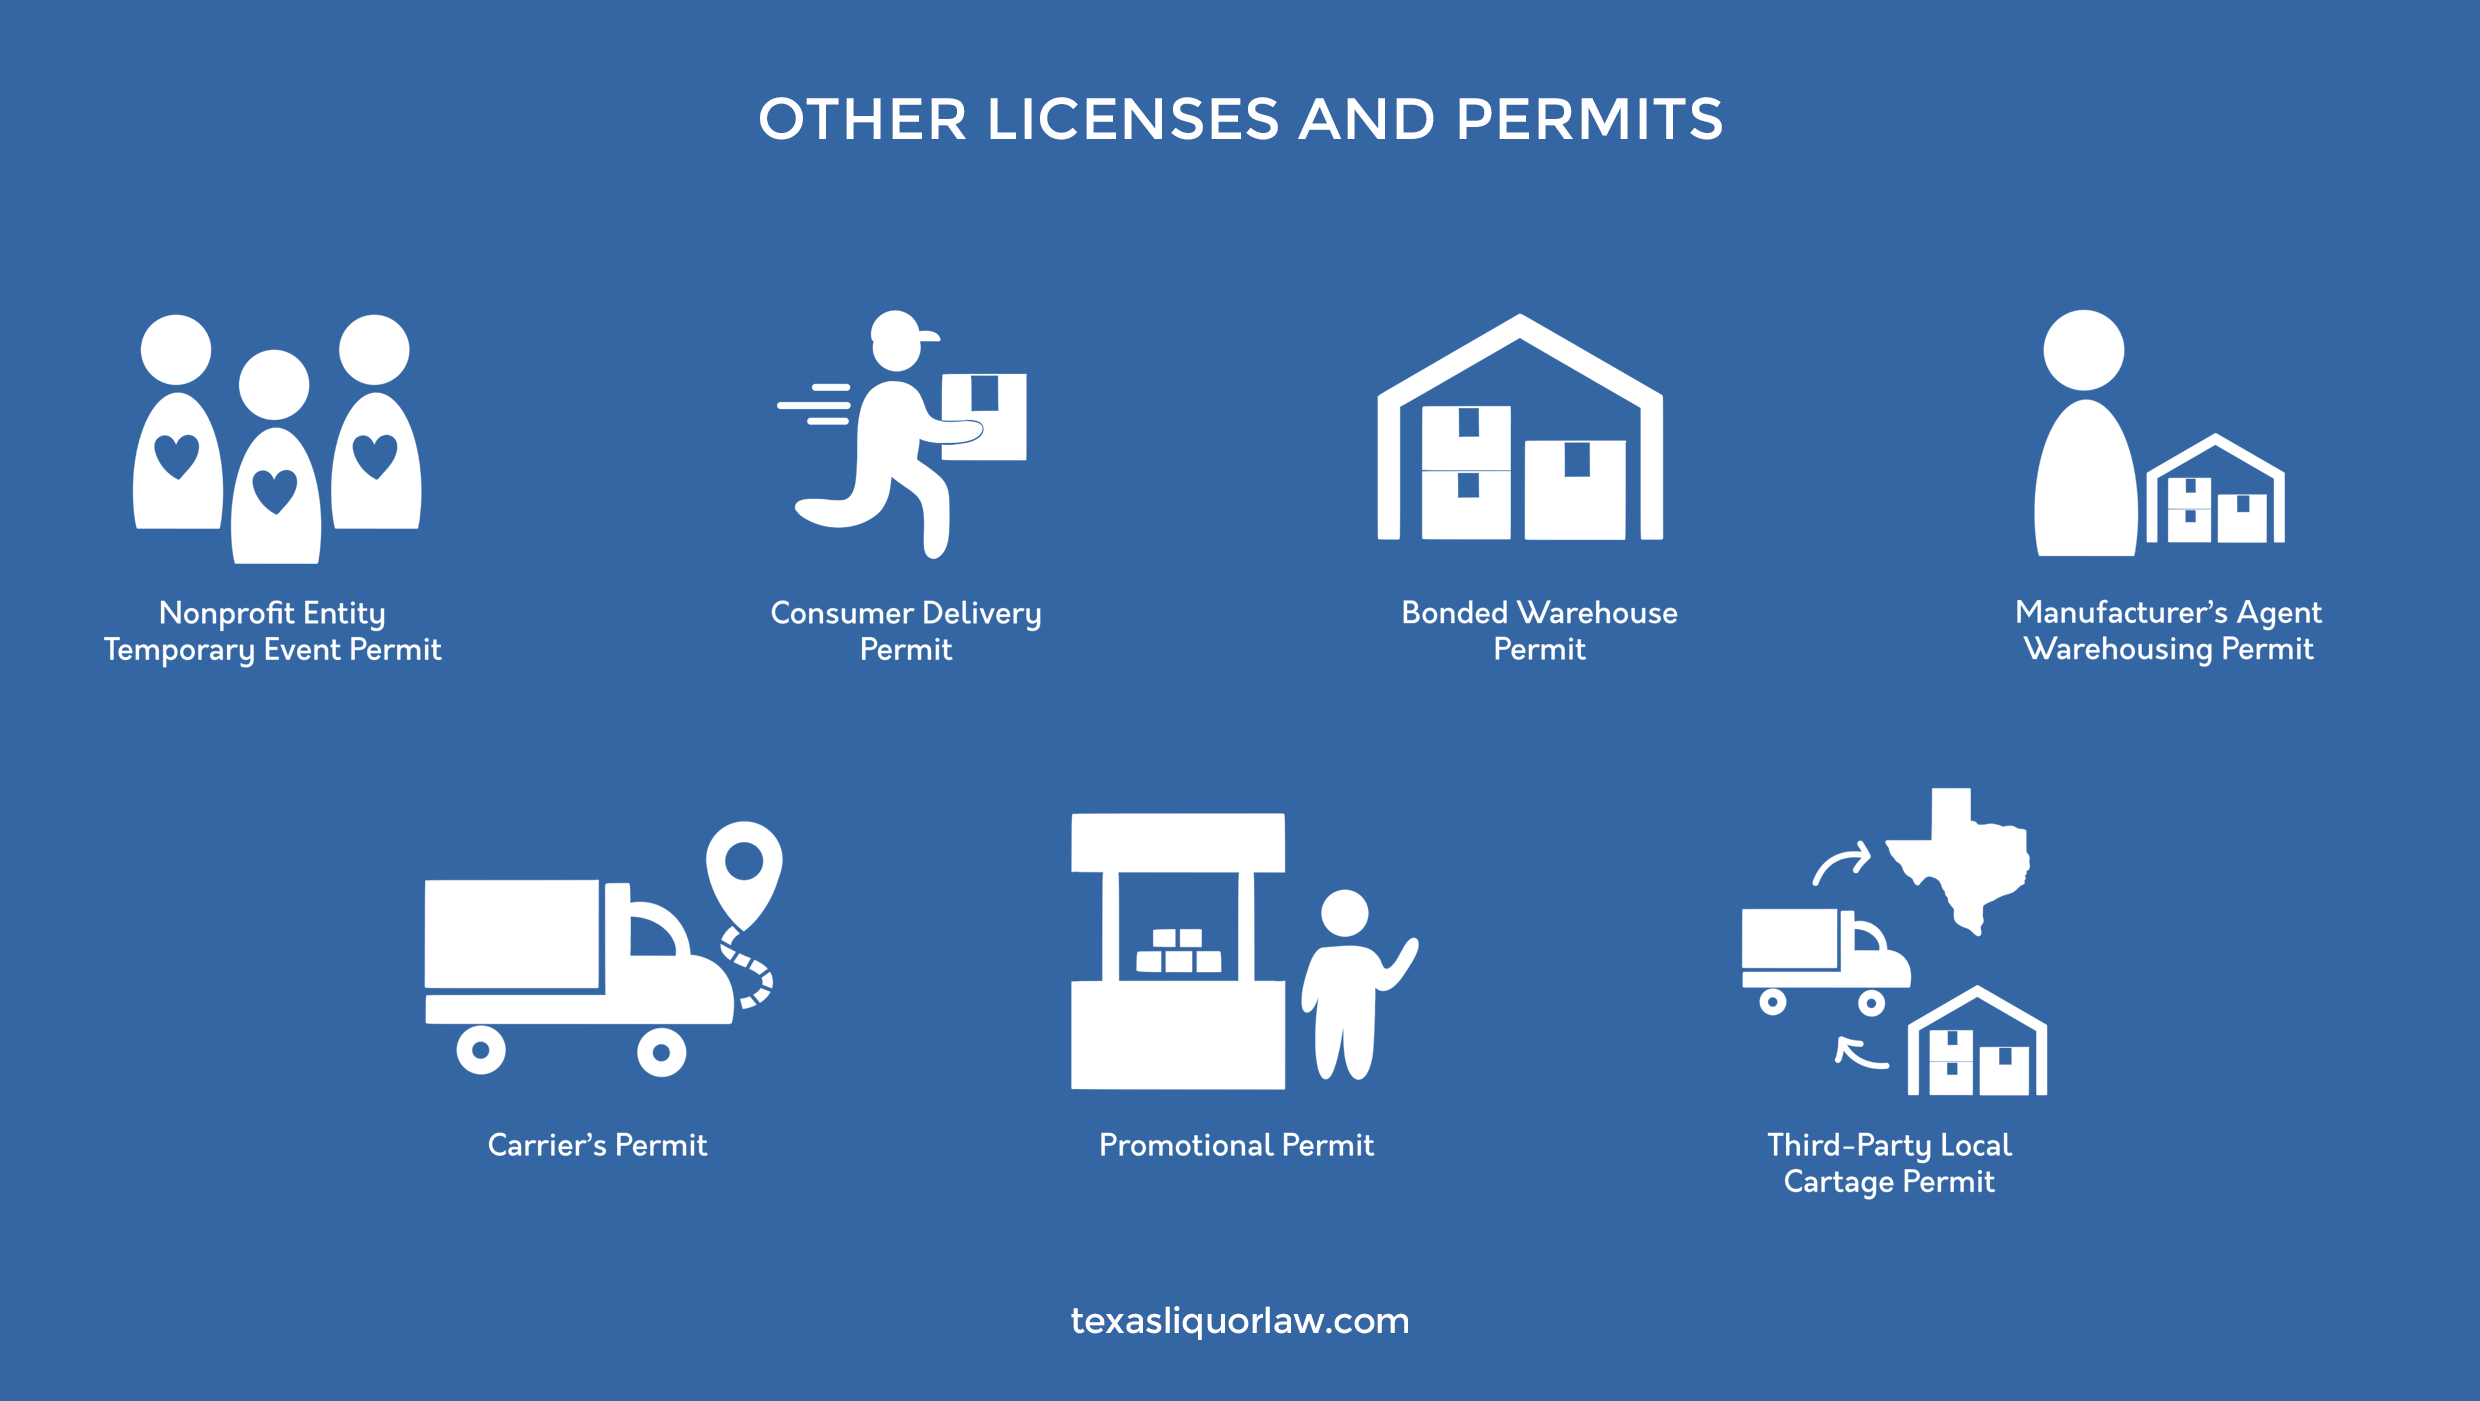 TABC - Other Licenses and Permits